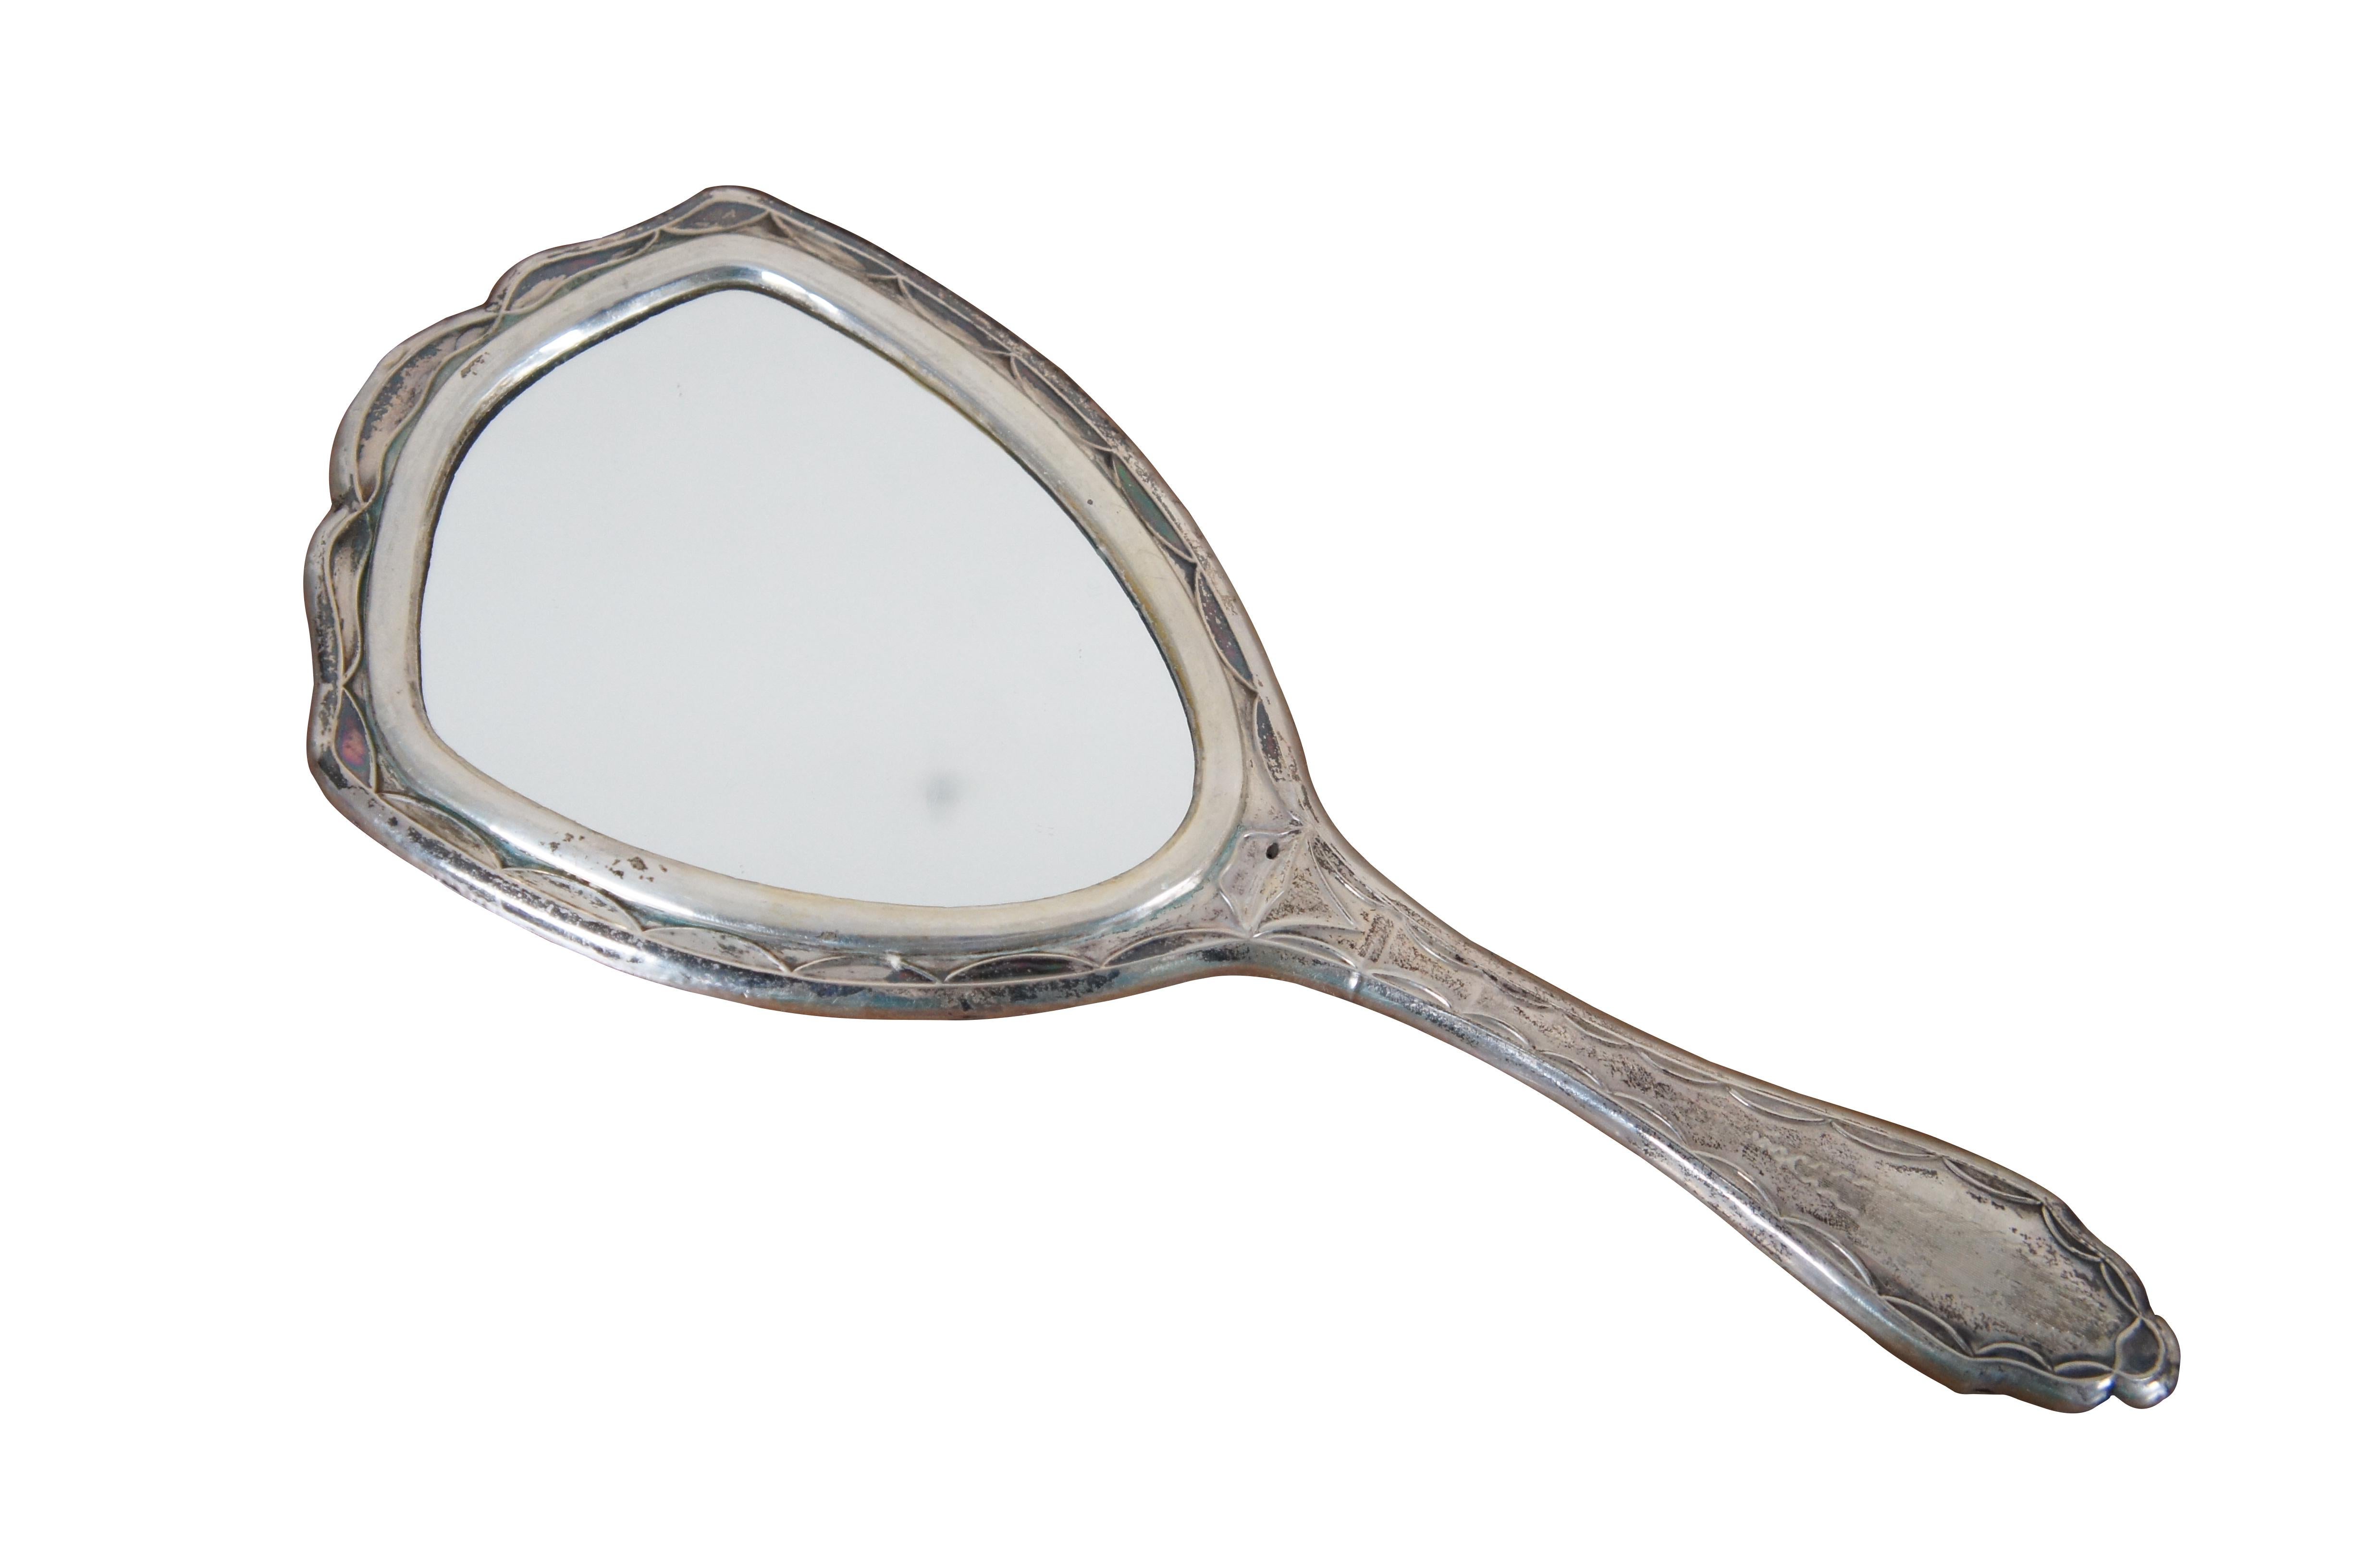 Antique Victorian silver vanity hand mirror featuring Art Nouveau styling with etched floral motif 

Dimensions:
4.25